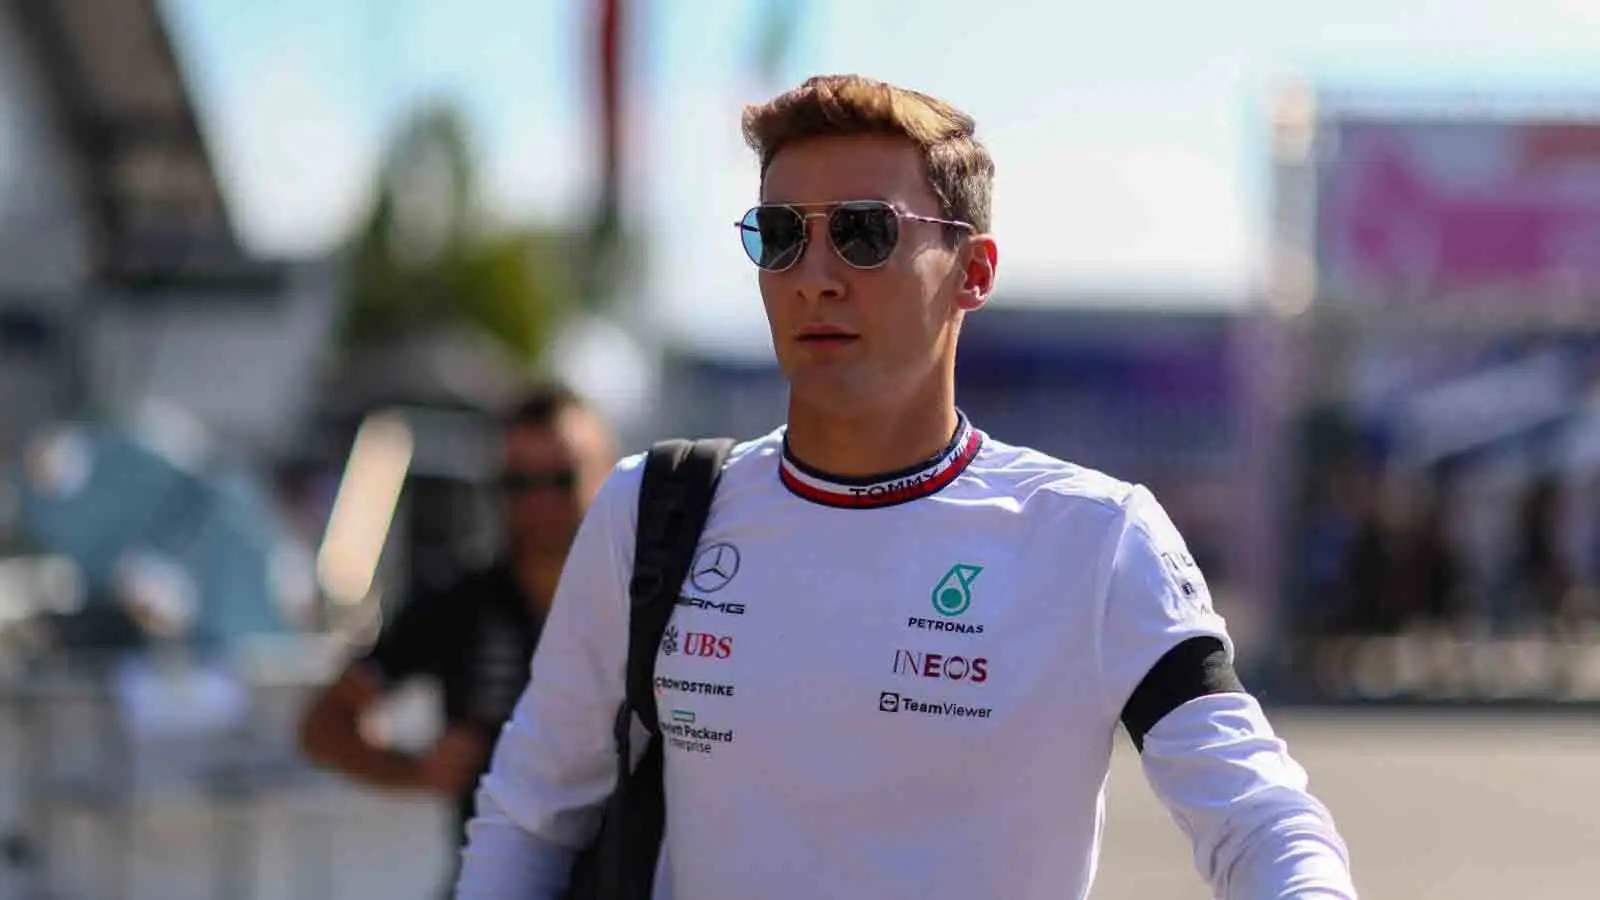 Mercedes driver George Russell in the paddock. Monza September 2022.